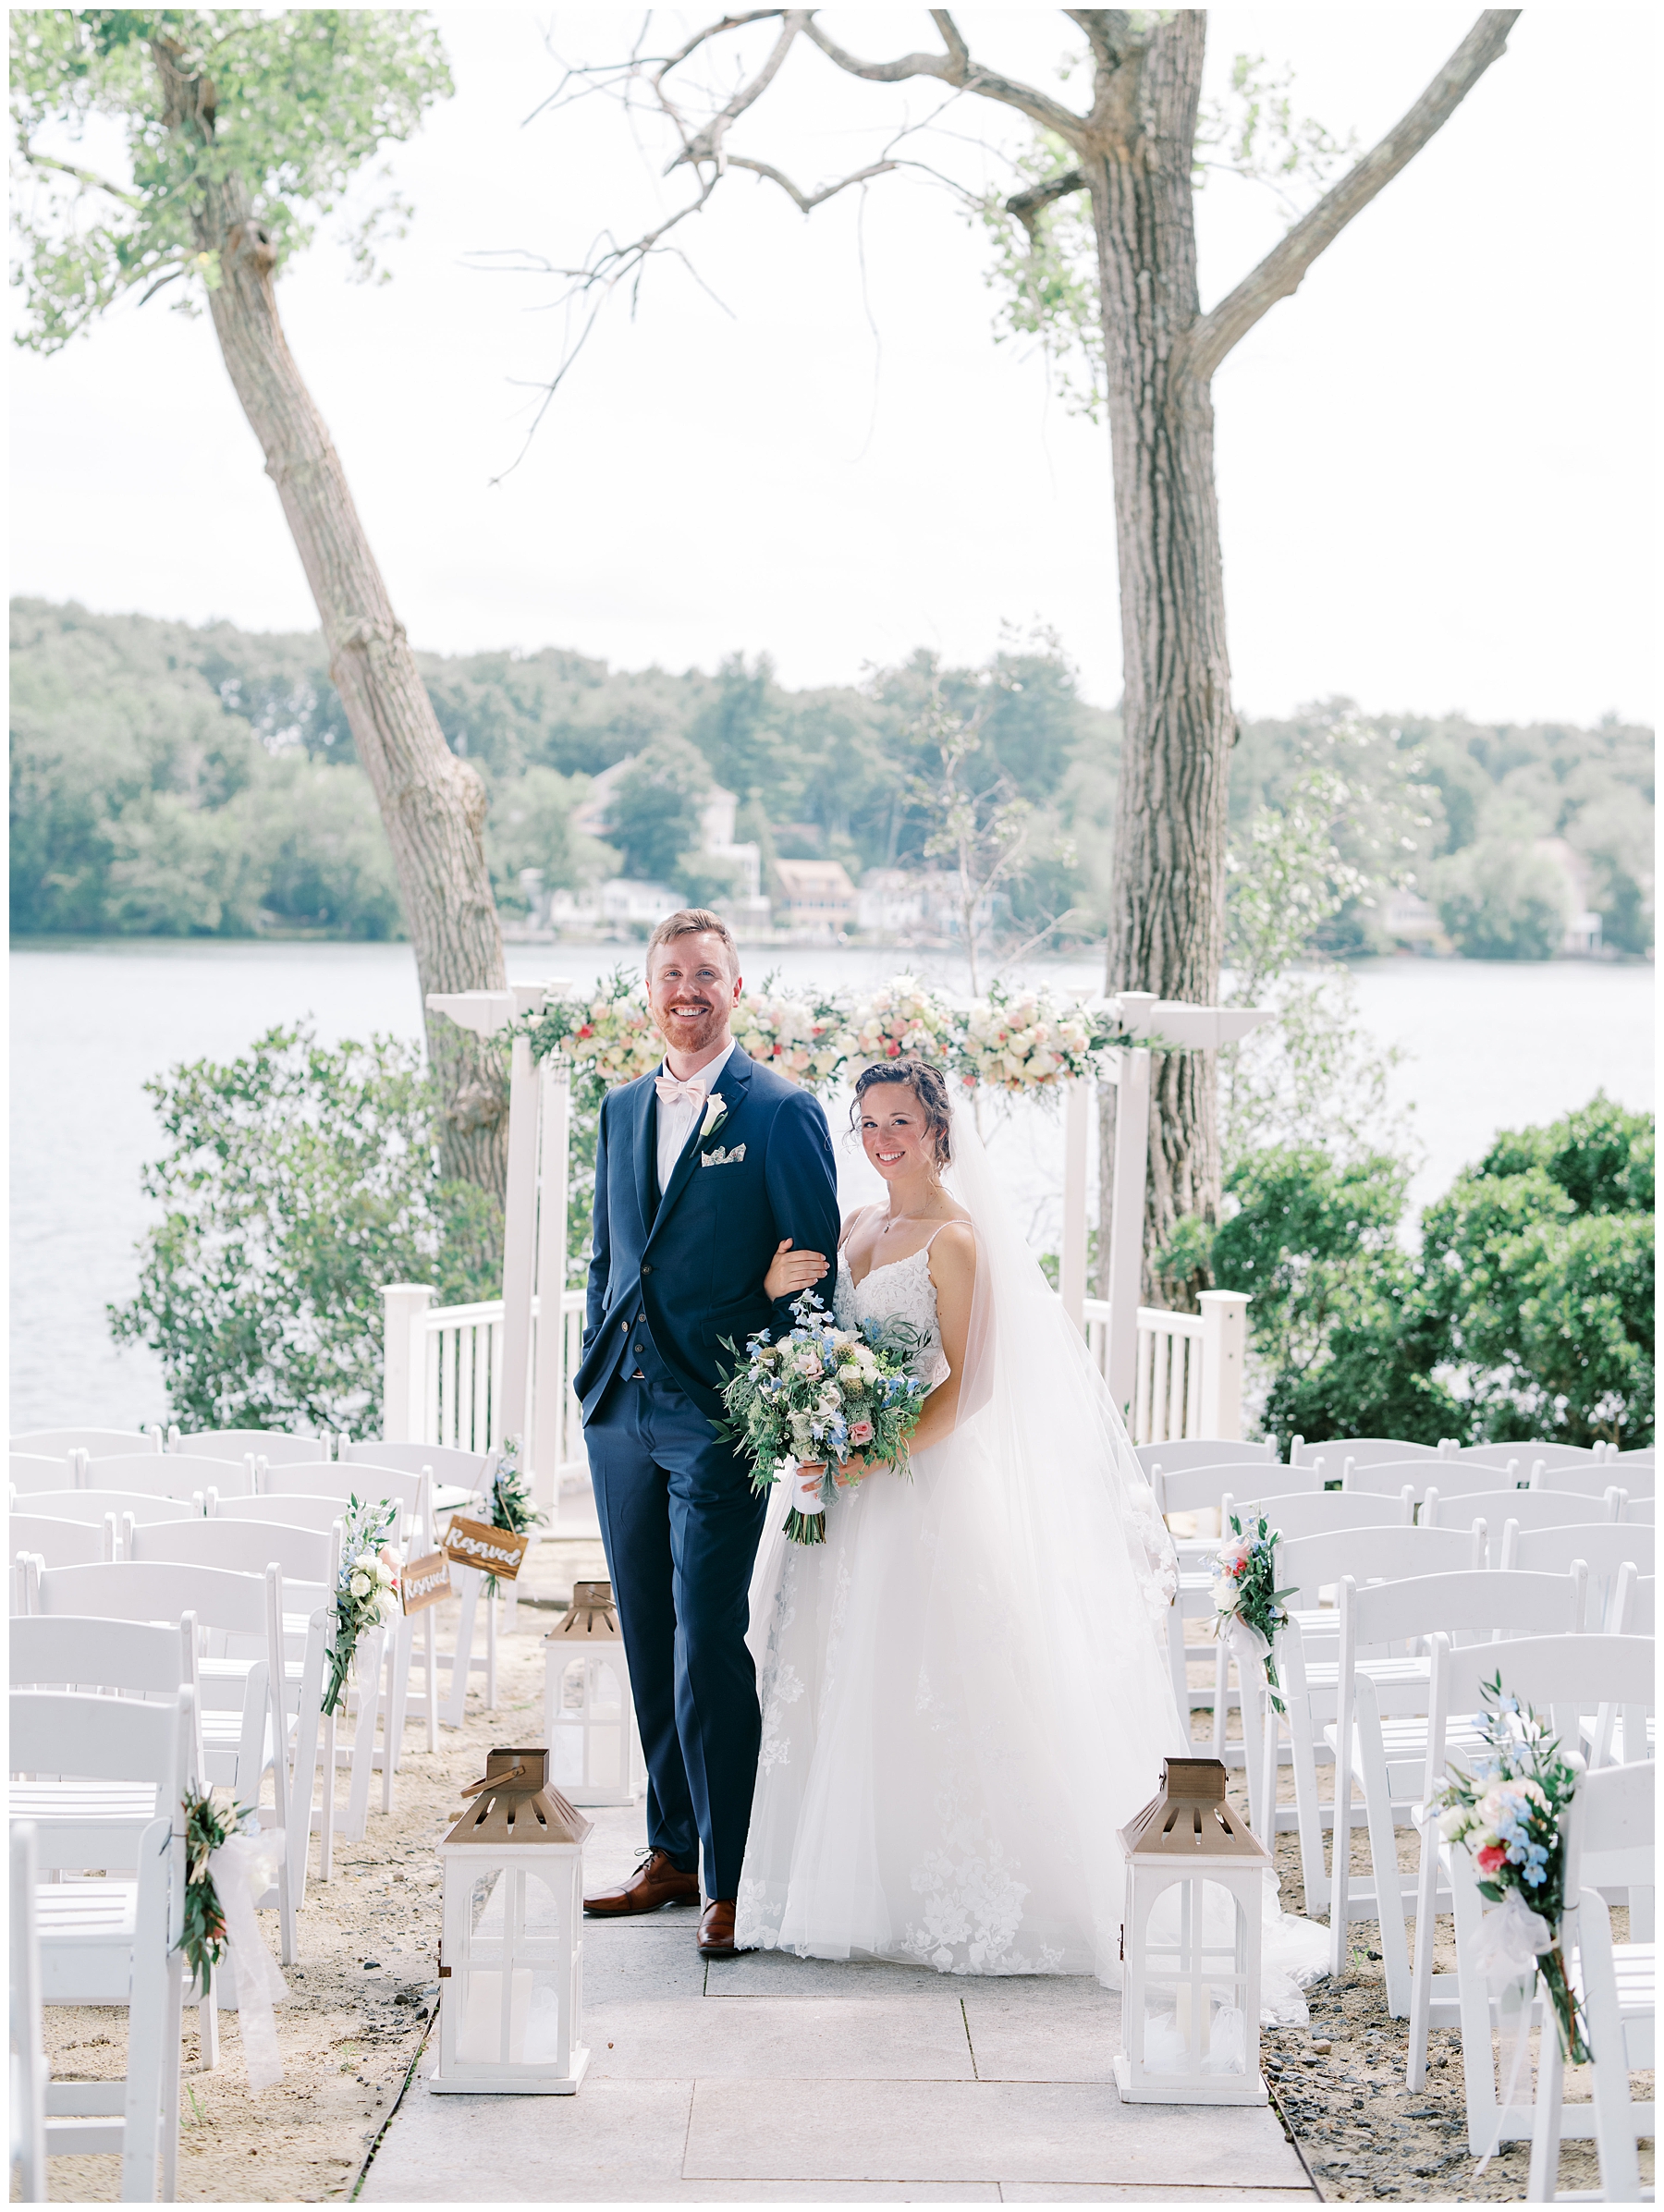 bride and groom portraits by Lake Pearl in Wrentham MA photographed by Stephanie Berenson Photography, a Boston wedding photographer